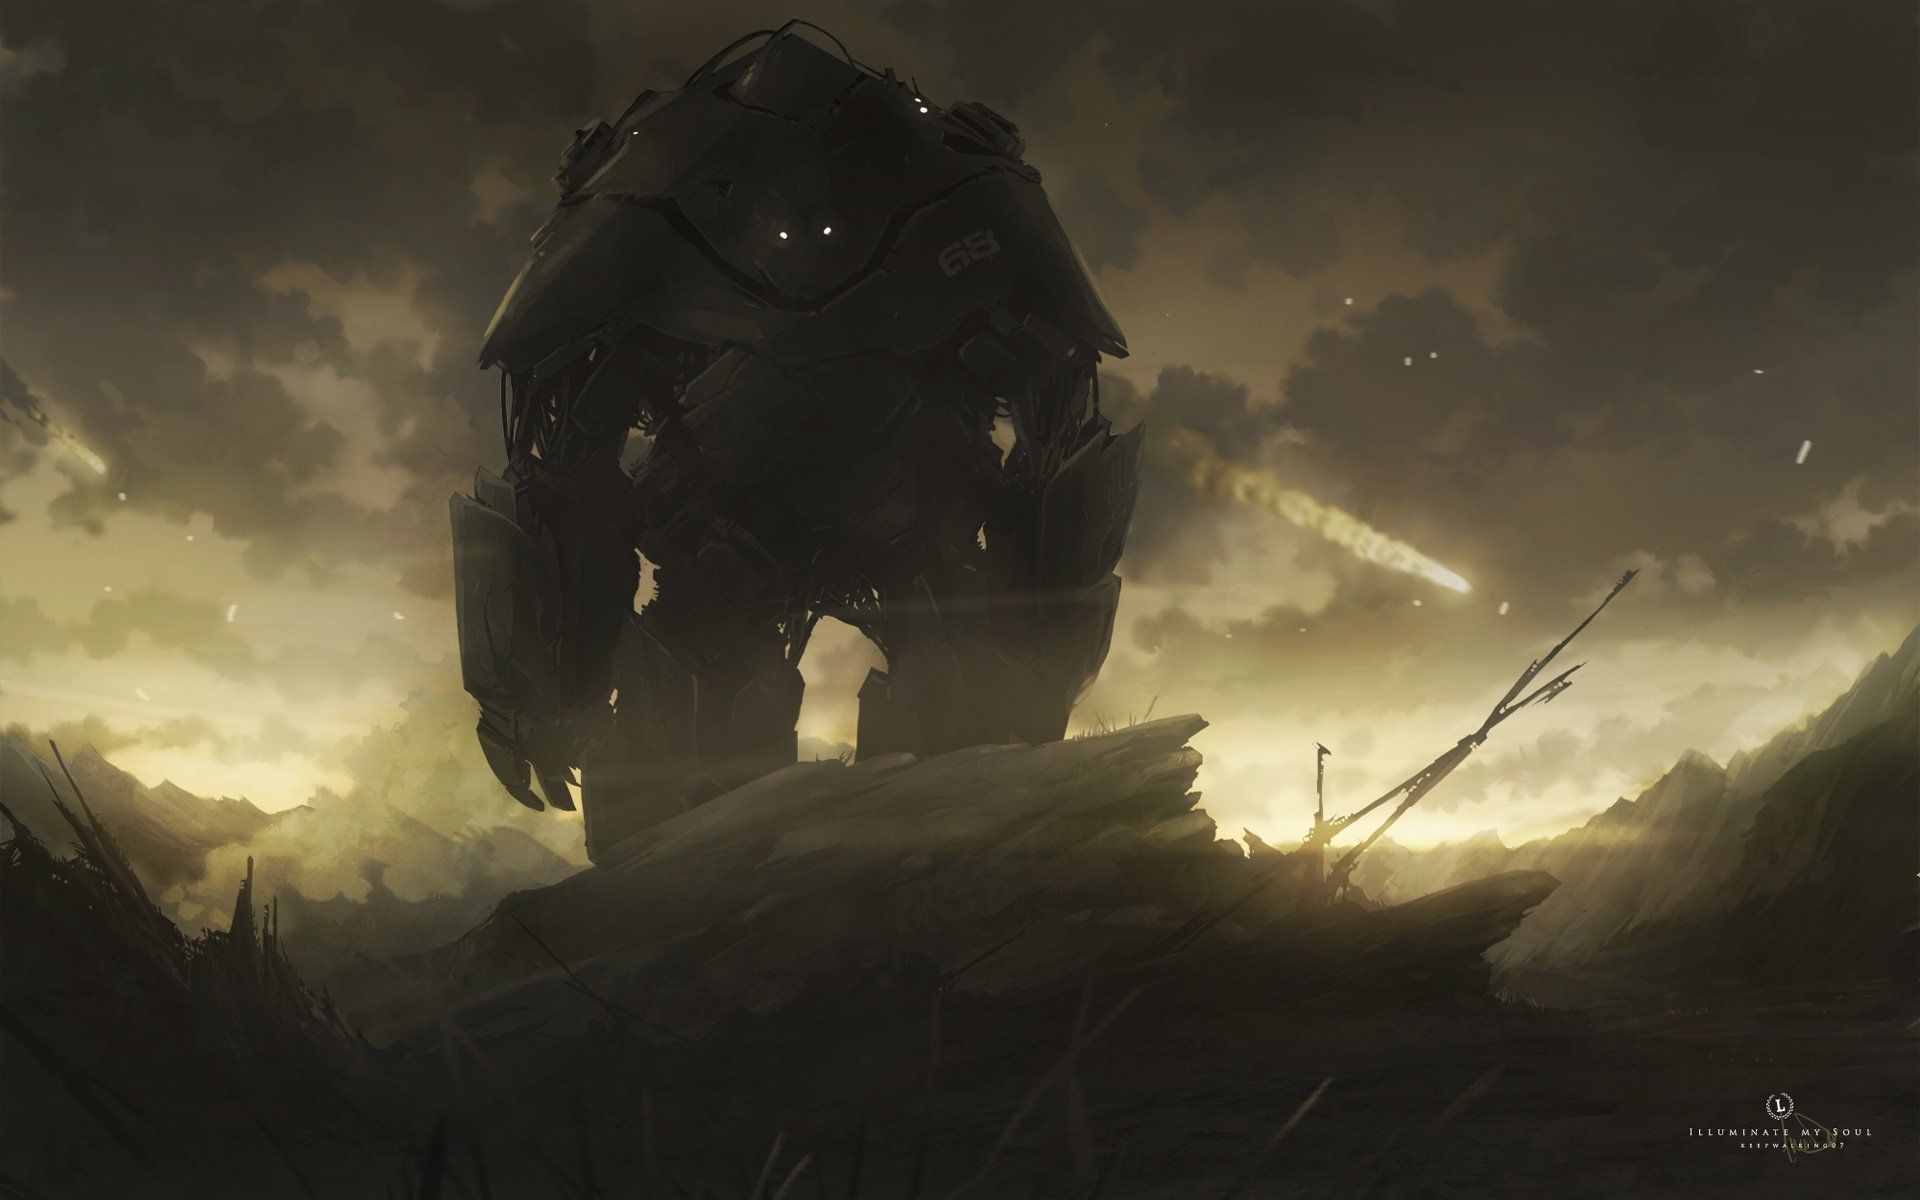 Giant Mech Wallpapers